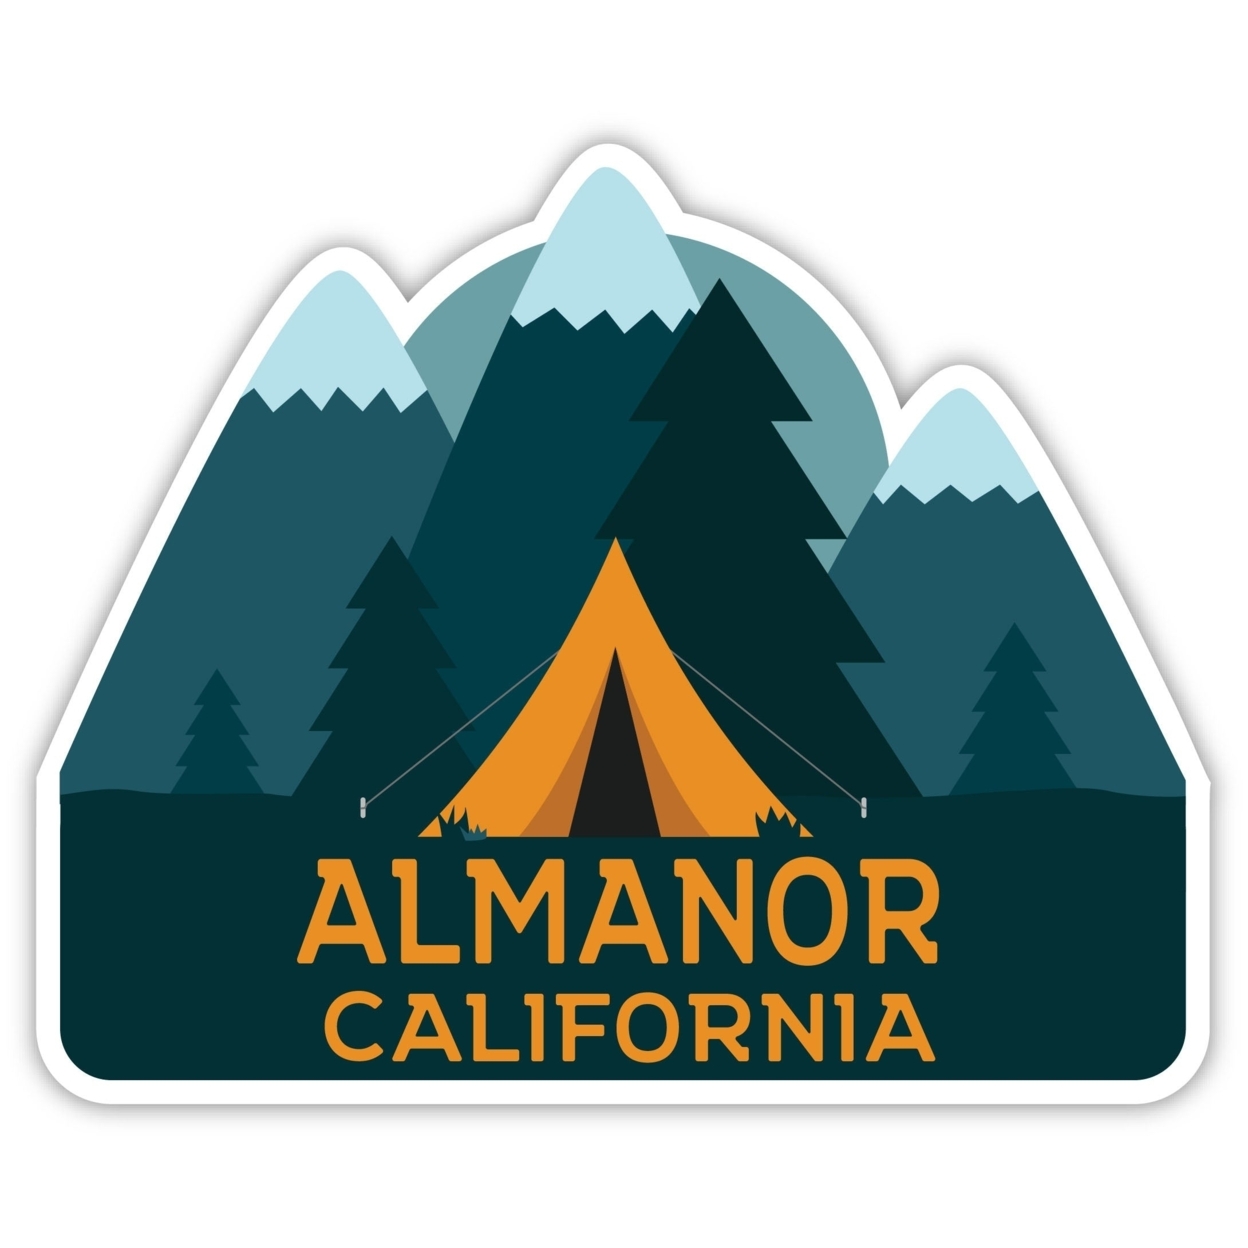 Almanor California Souvenir Decorative Stickers (Choose Theme And Size) - 4-Pack, 10-Inch, Bear